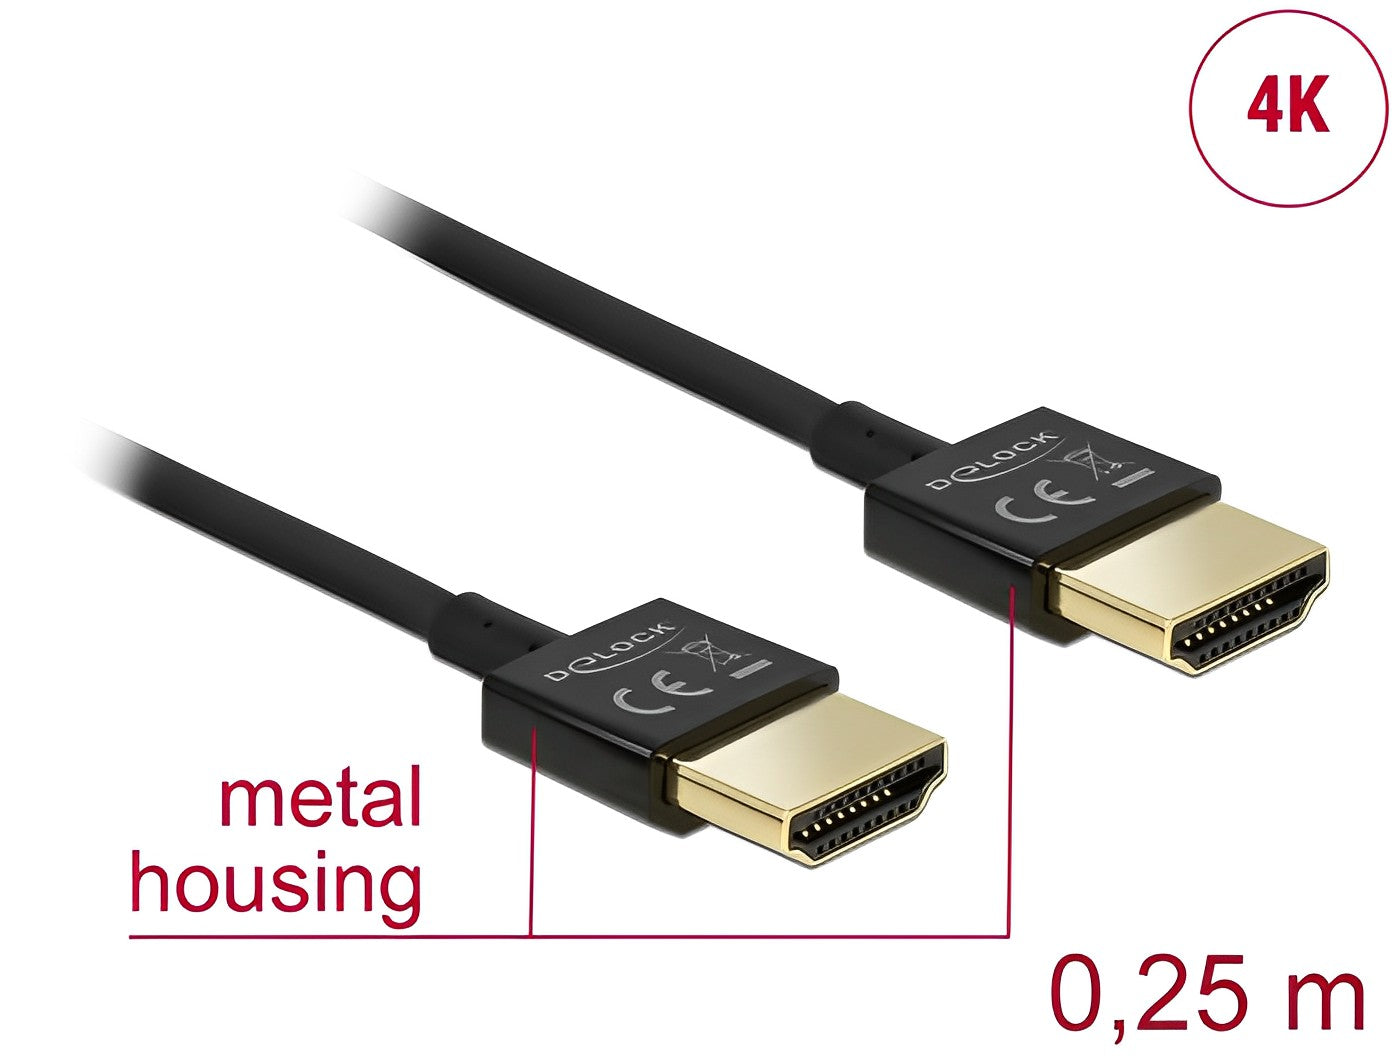 Delock Cable High Speed HDMI with Ethernet - HDMI-A male > HDMI-A male 3D 4K 0.25 m Slim High Quality black - delock.israel